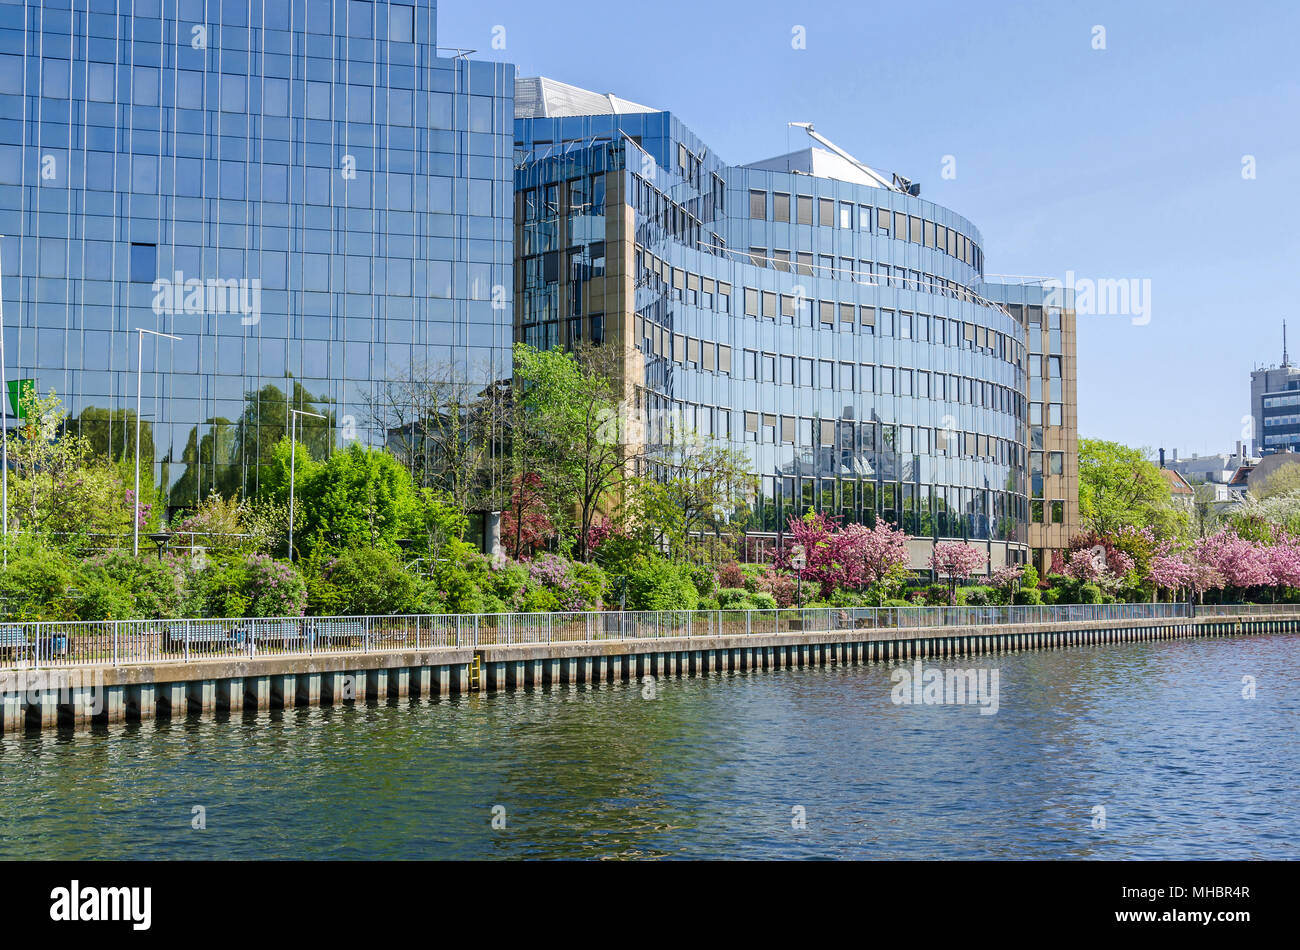 Reflecting facade of the buildings of Skandia insurance company on banks of the river Spree in Berlin with flowering trees in the springtime Stock Photo